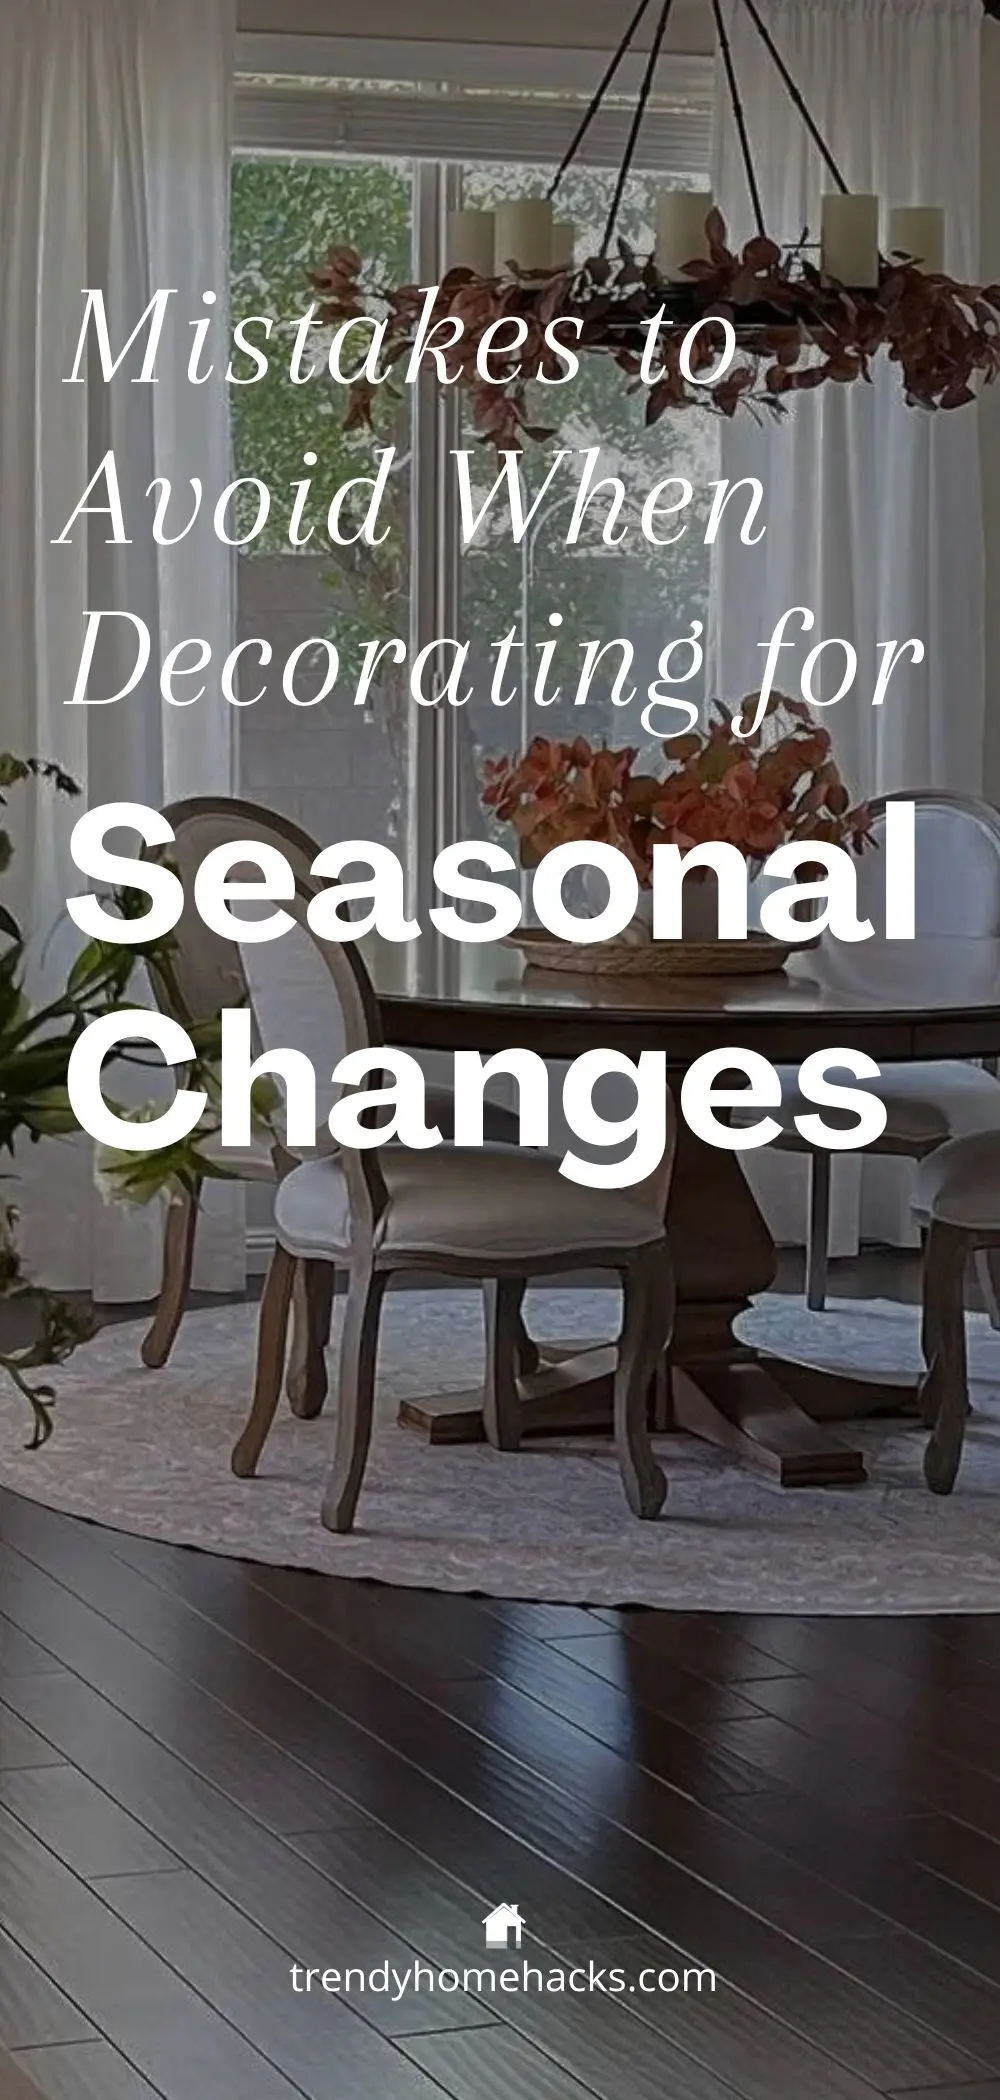 a Pinterest pin with a dark background image and text overly "Mistakes to avoid when decorating for seasonal changes"